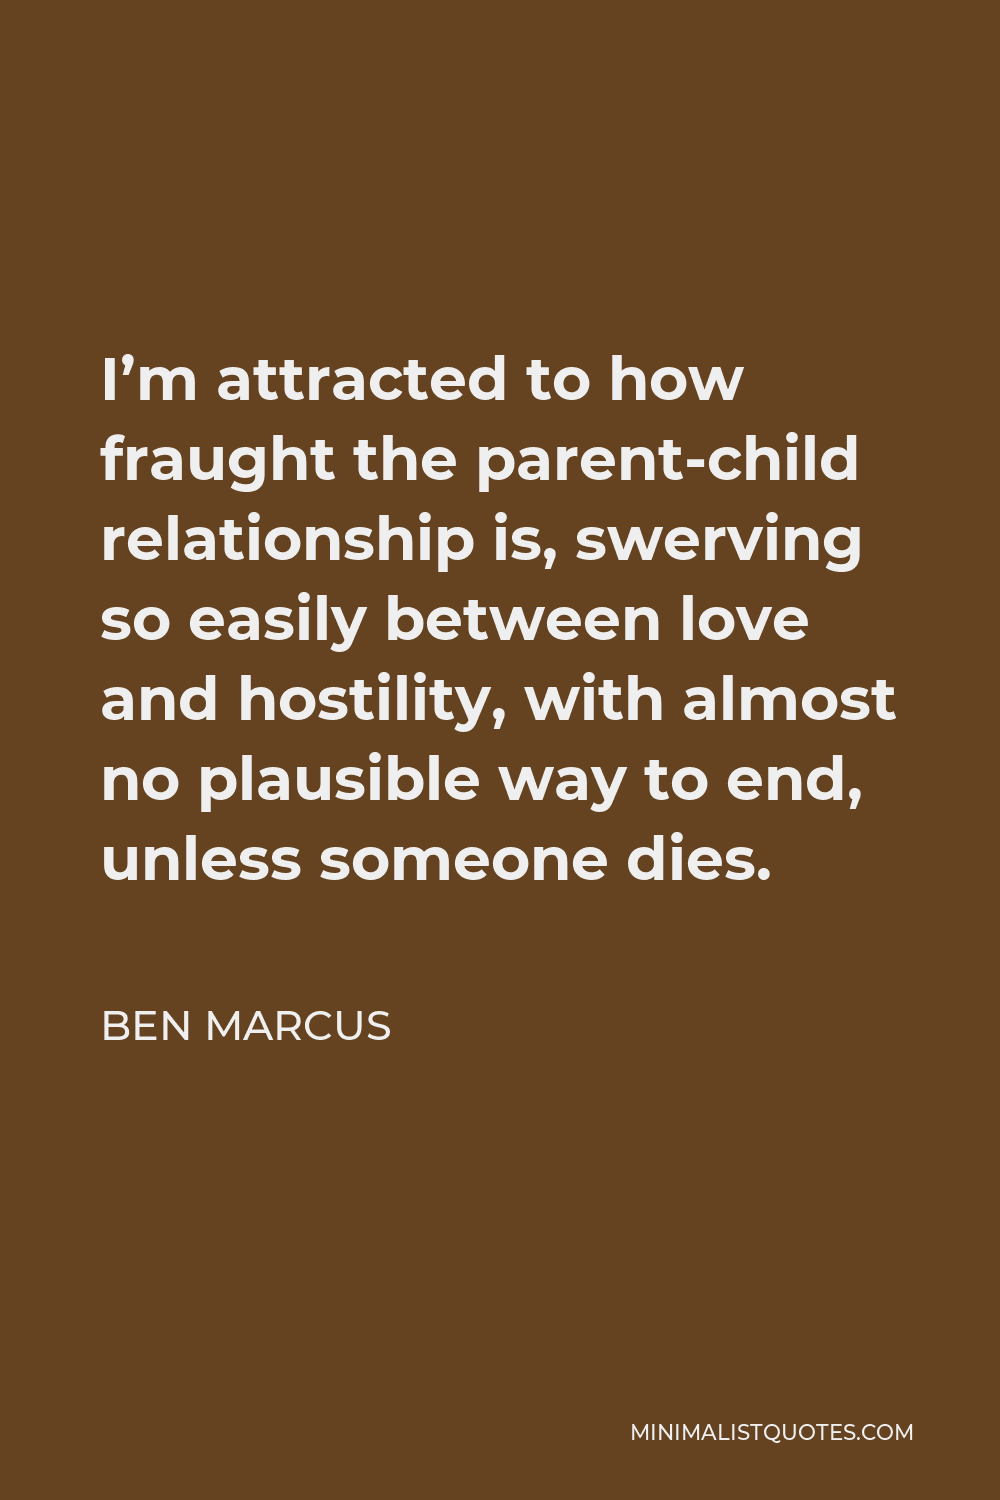 Ben Marcus Quote - I’m attracted to how fraught the parent-child relationship is, swerving so easily between love and hostility, with almost no plausible way to end, unless someone dies.